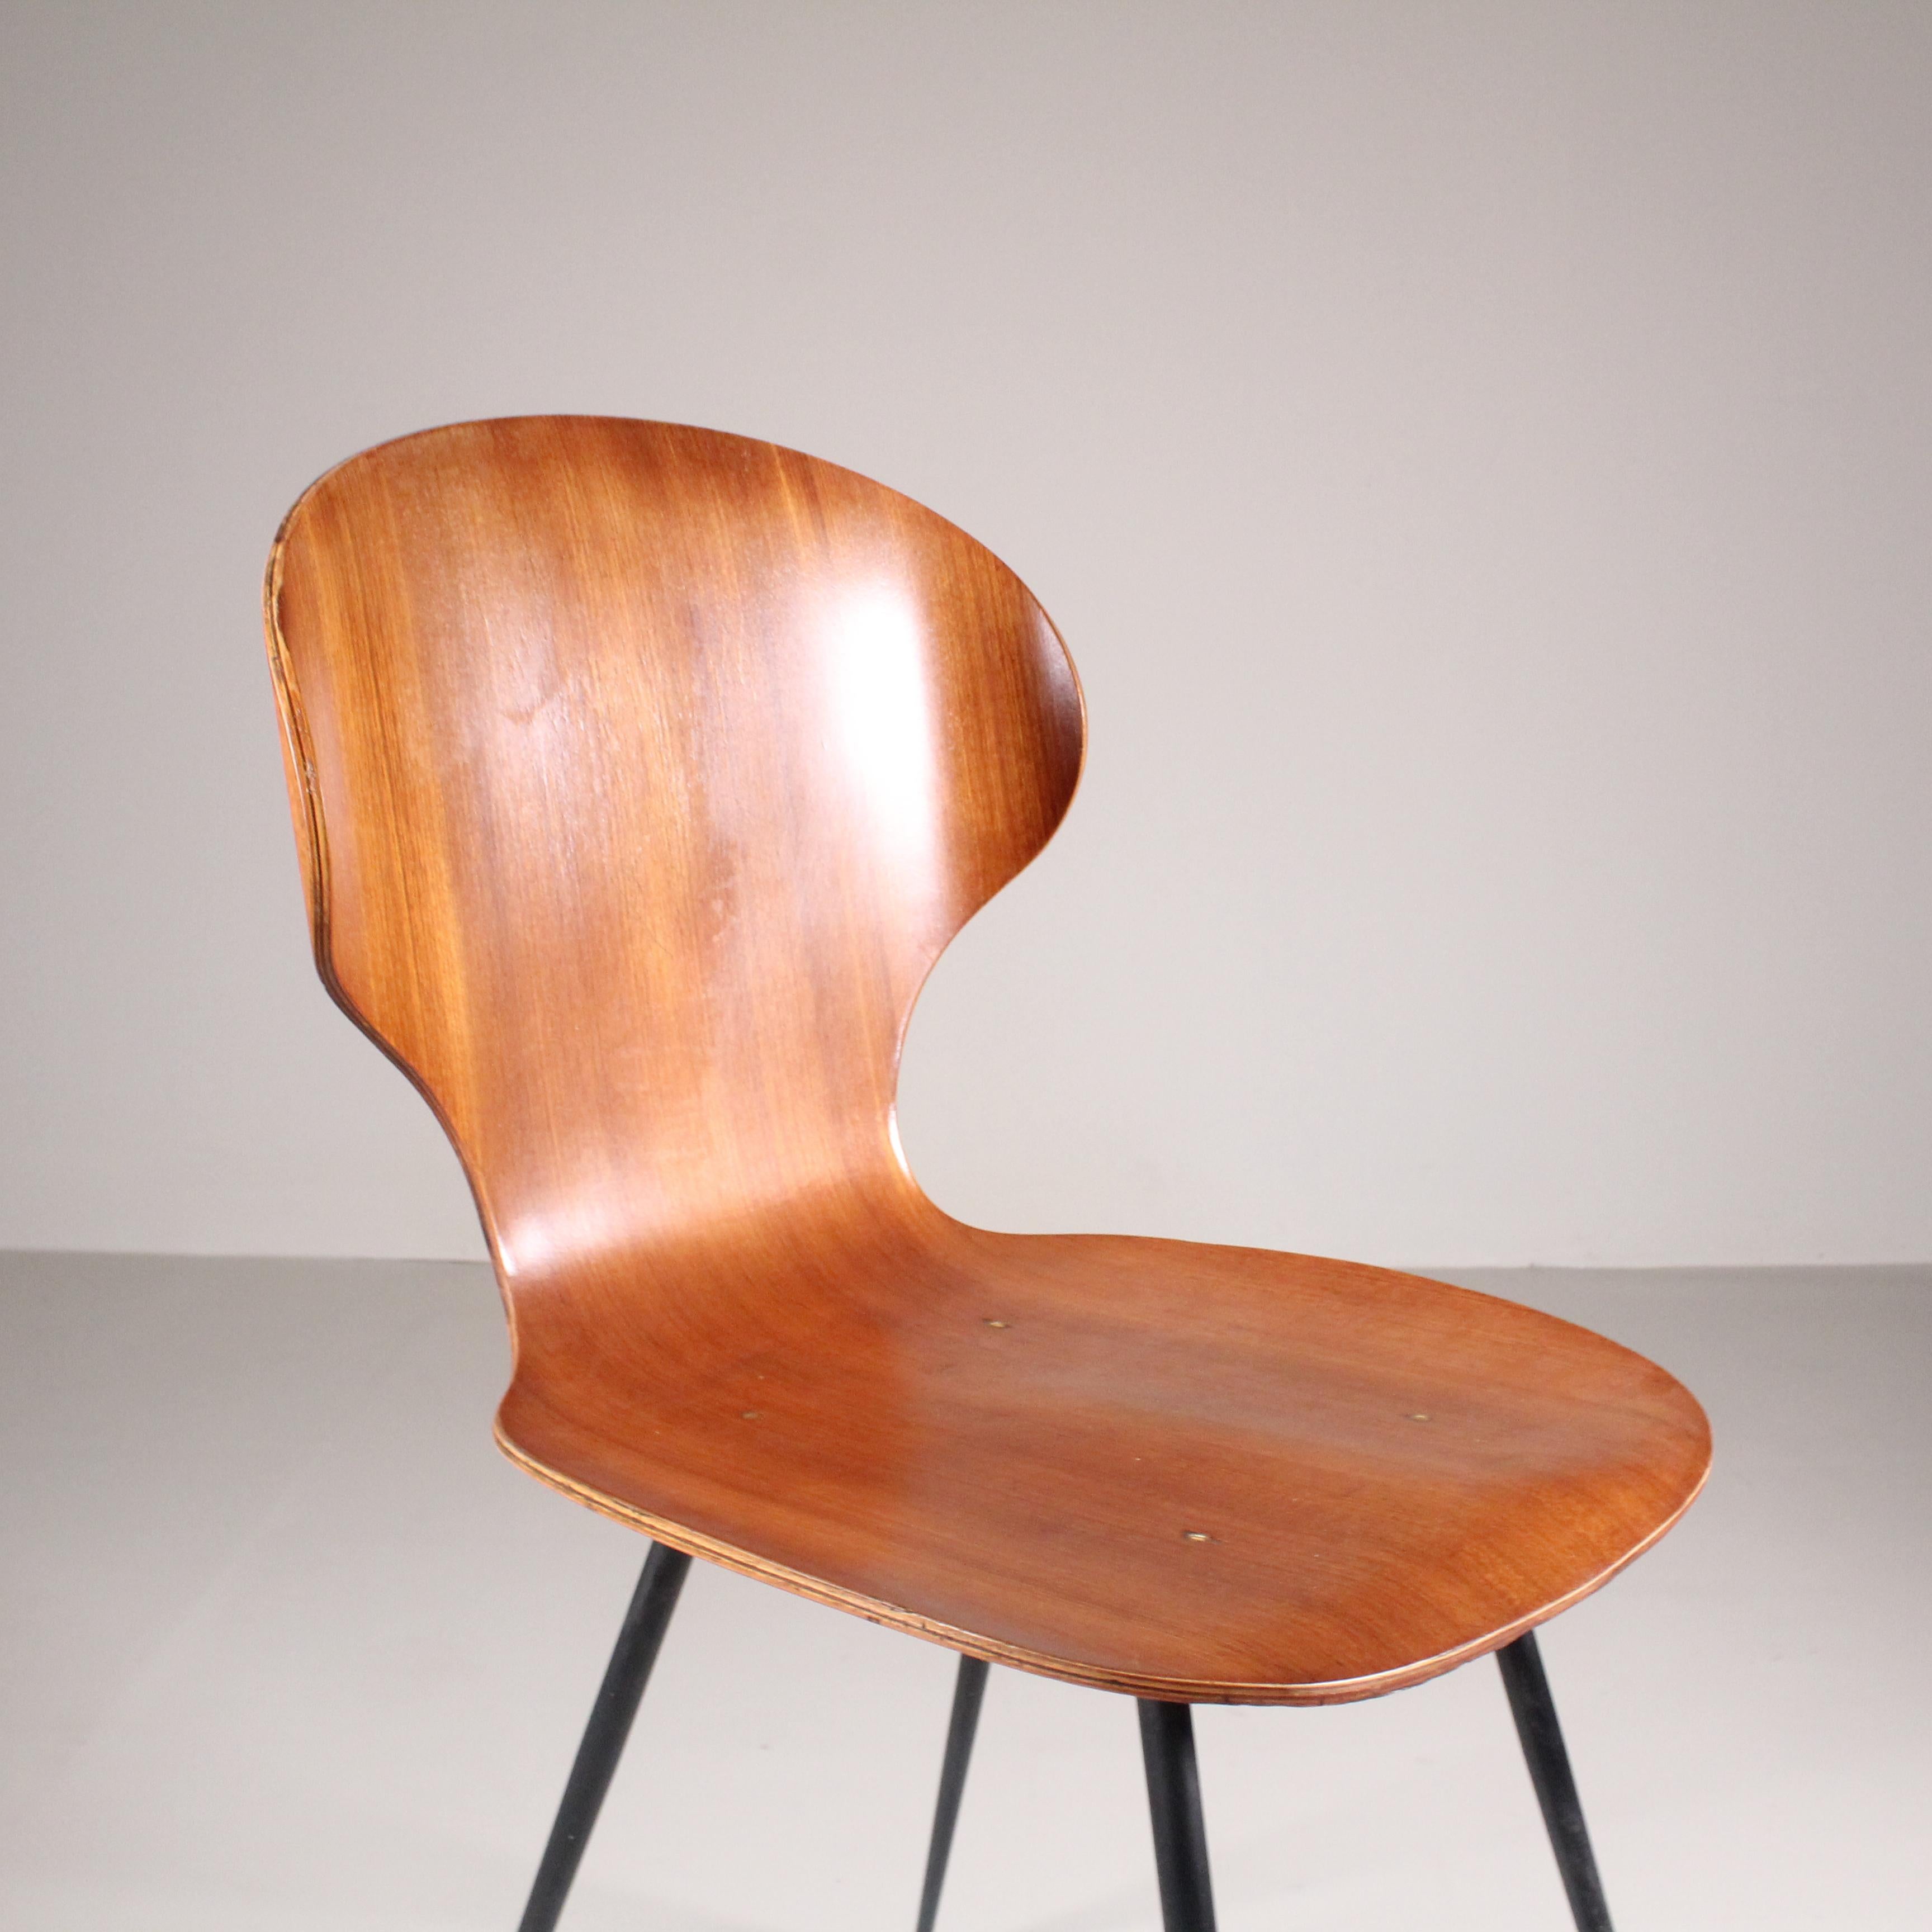 Set of 4 Lulli Chairs, Carlo Ratti, Curved Woods Industry, 1950s For Sale 1